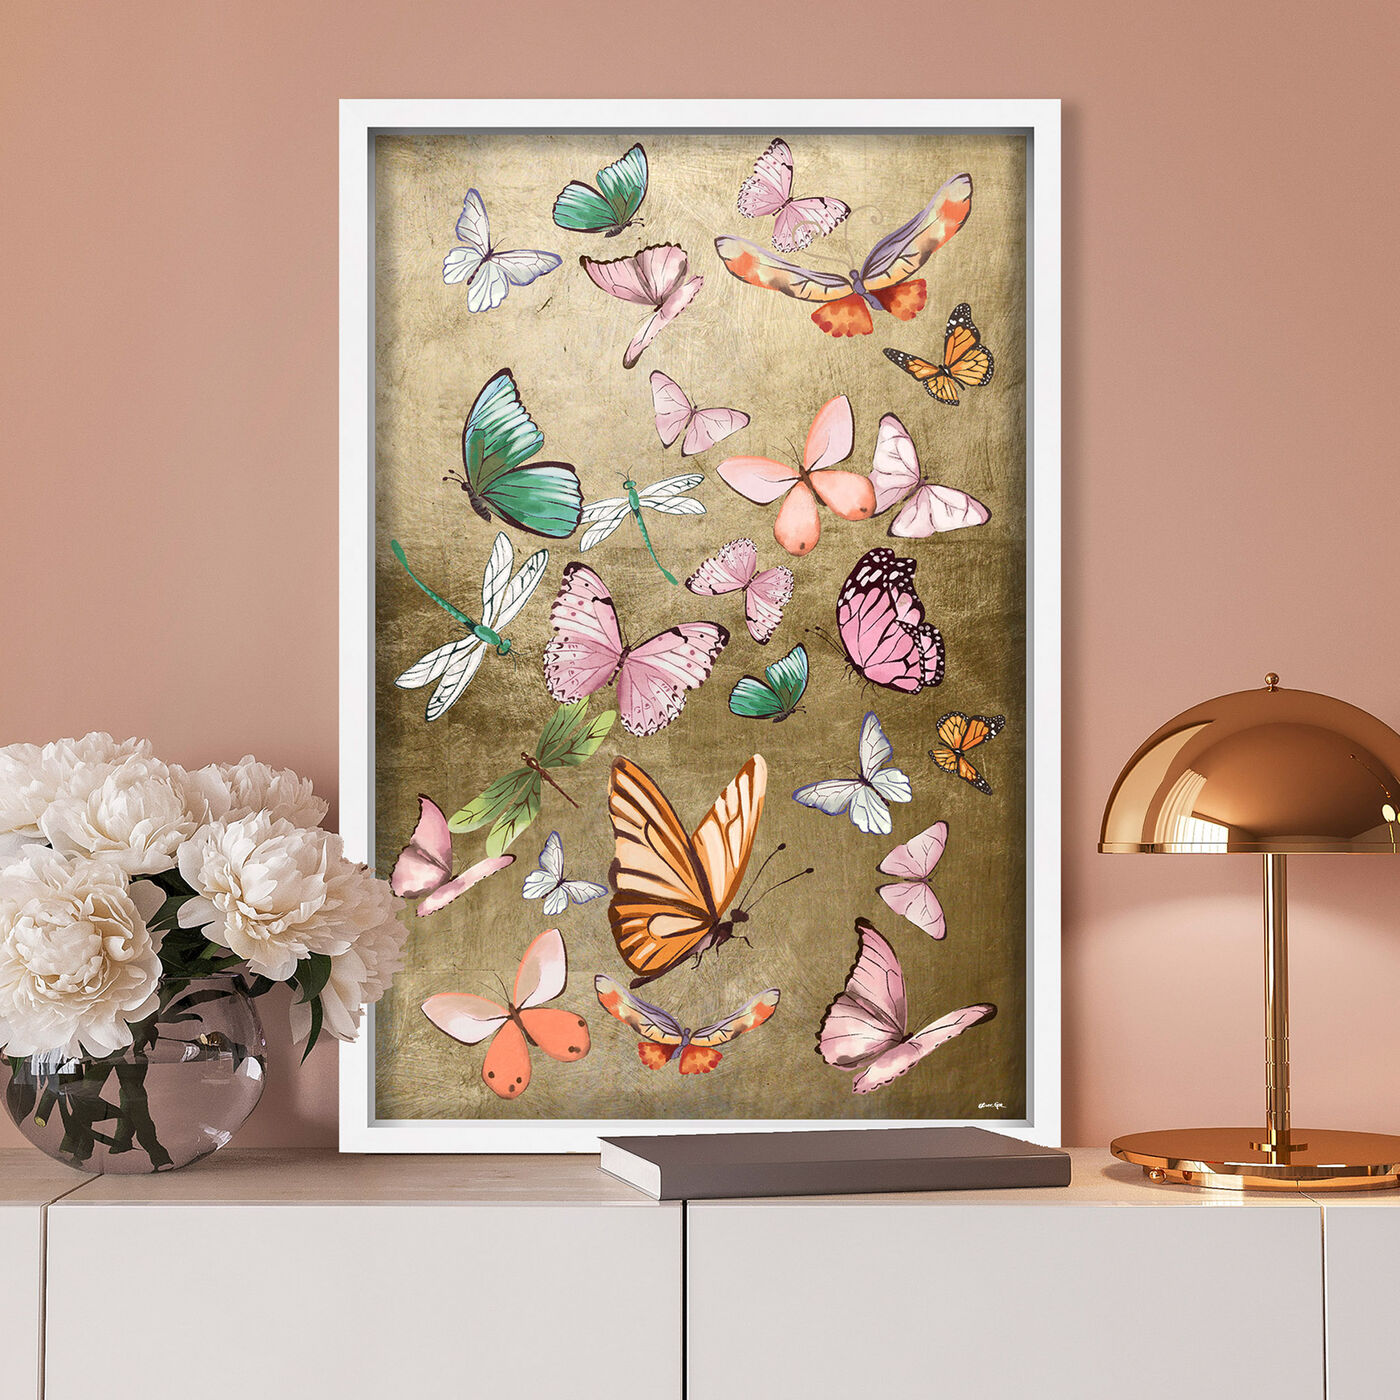 Animals Over Hand-Applied Leaf - Oliver The Gold Flying Art Wall With Gal by Gold |